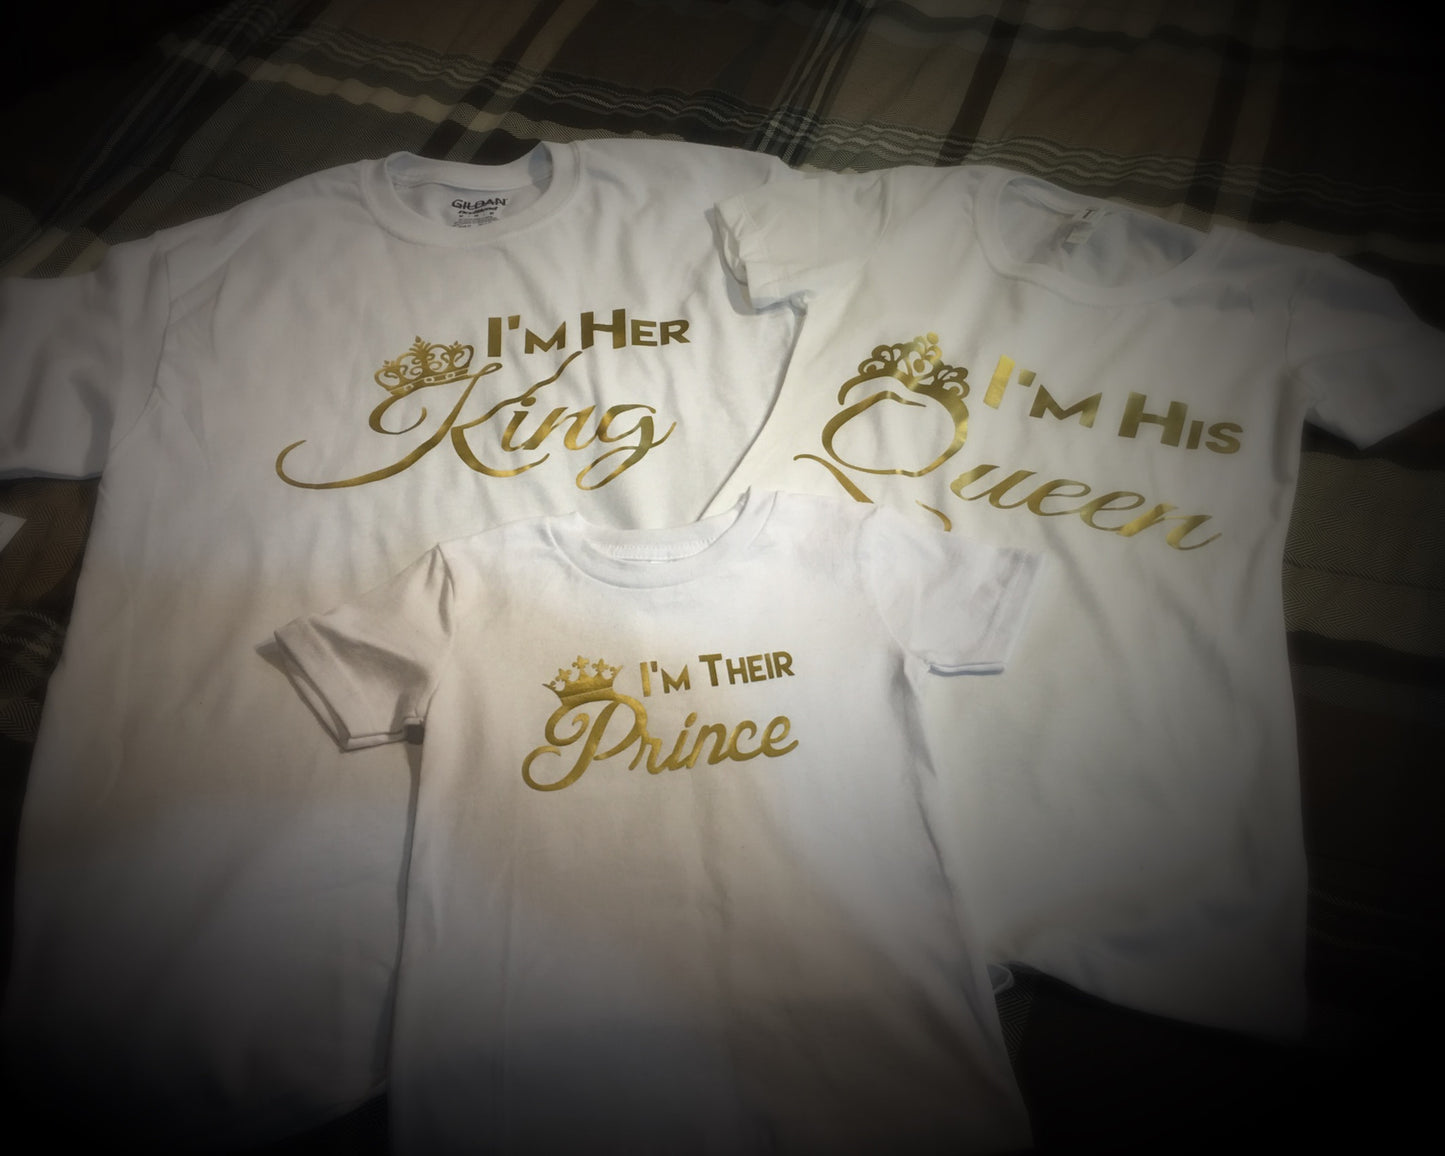 Family - King,Queen,Princess or Prince T-Shirt - White w/ Gold Graphics - 550strong